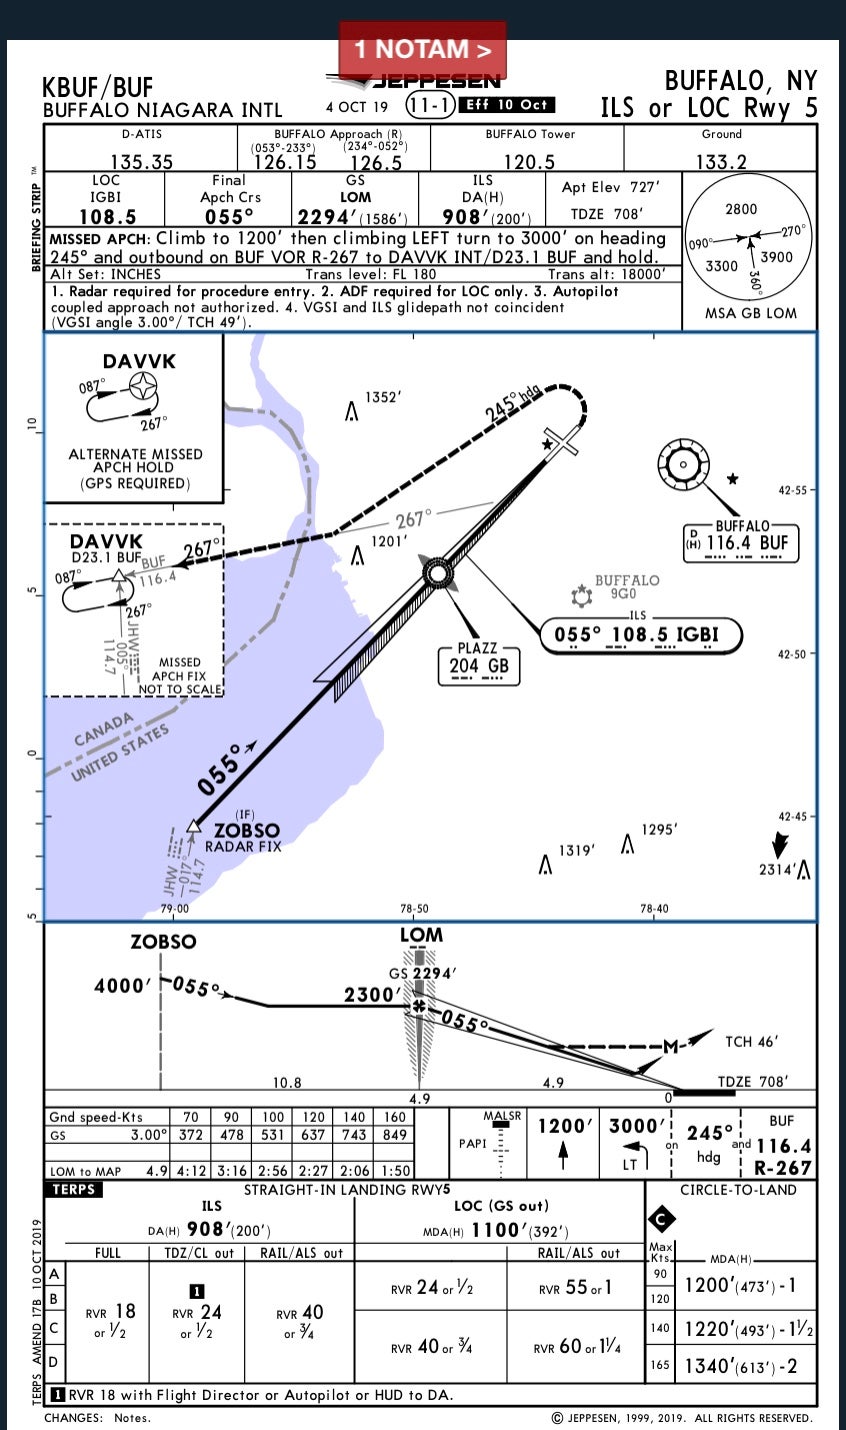 Dick Karl's NOTAM for his flight to Buffalo.